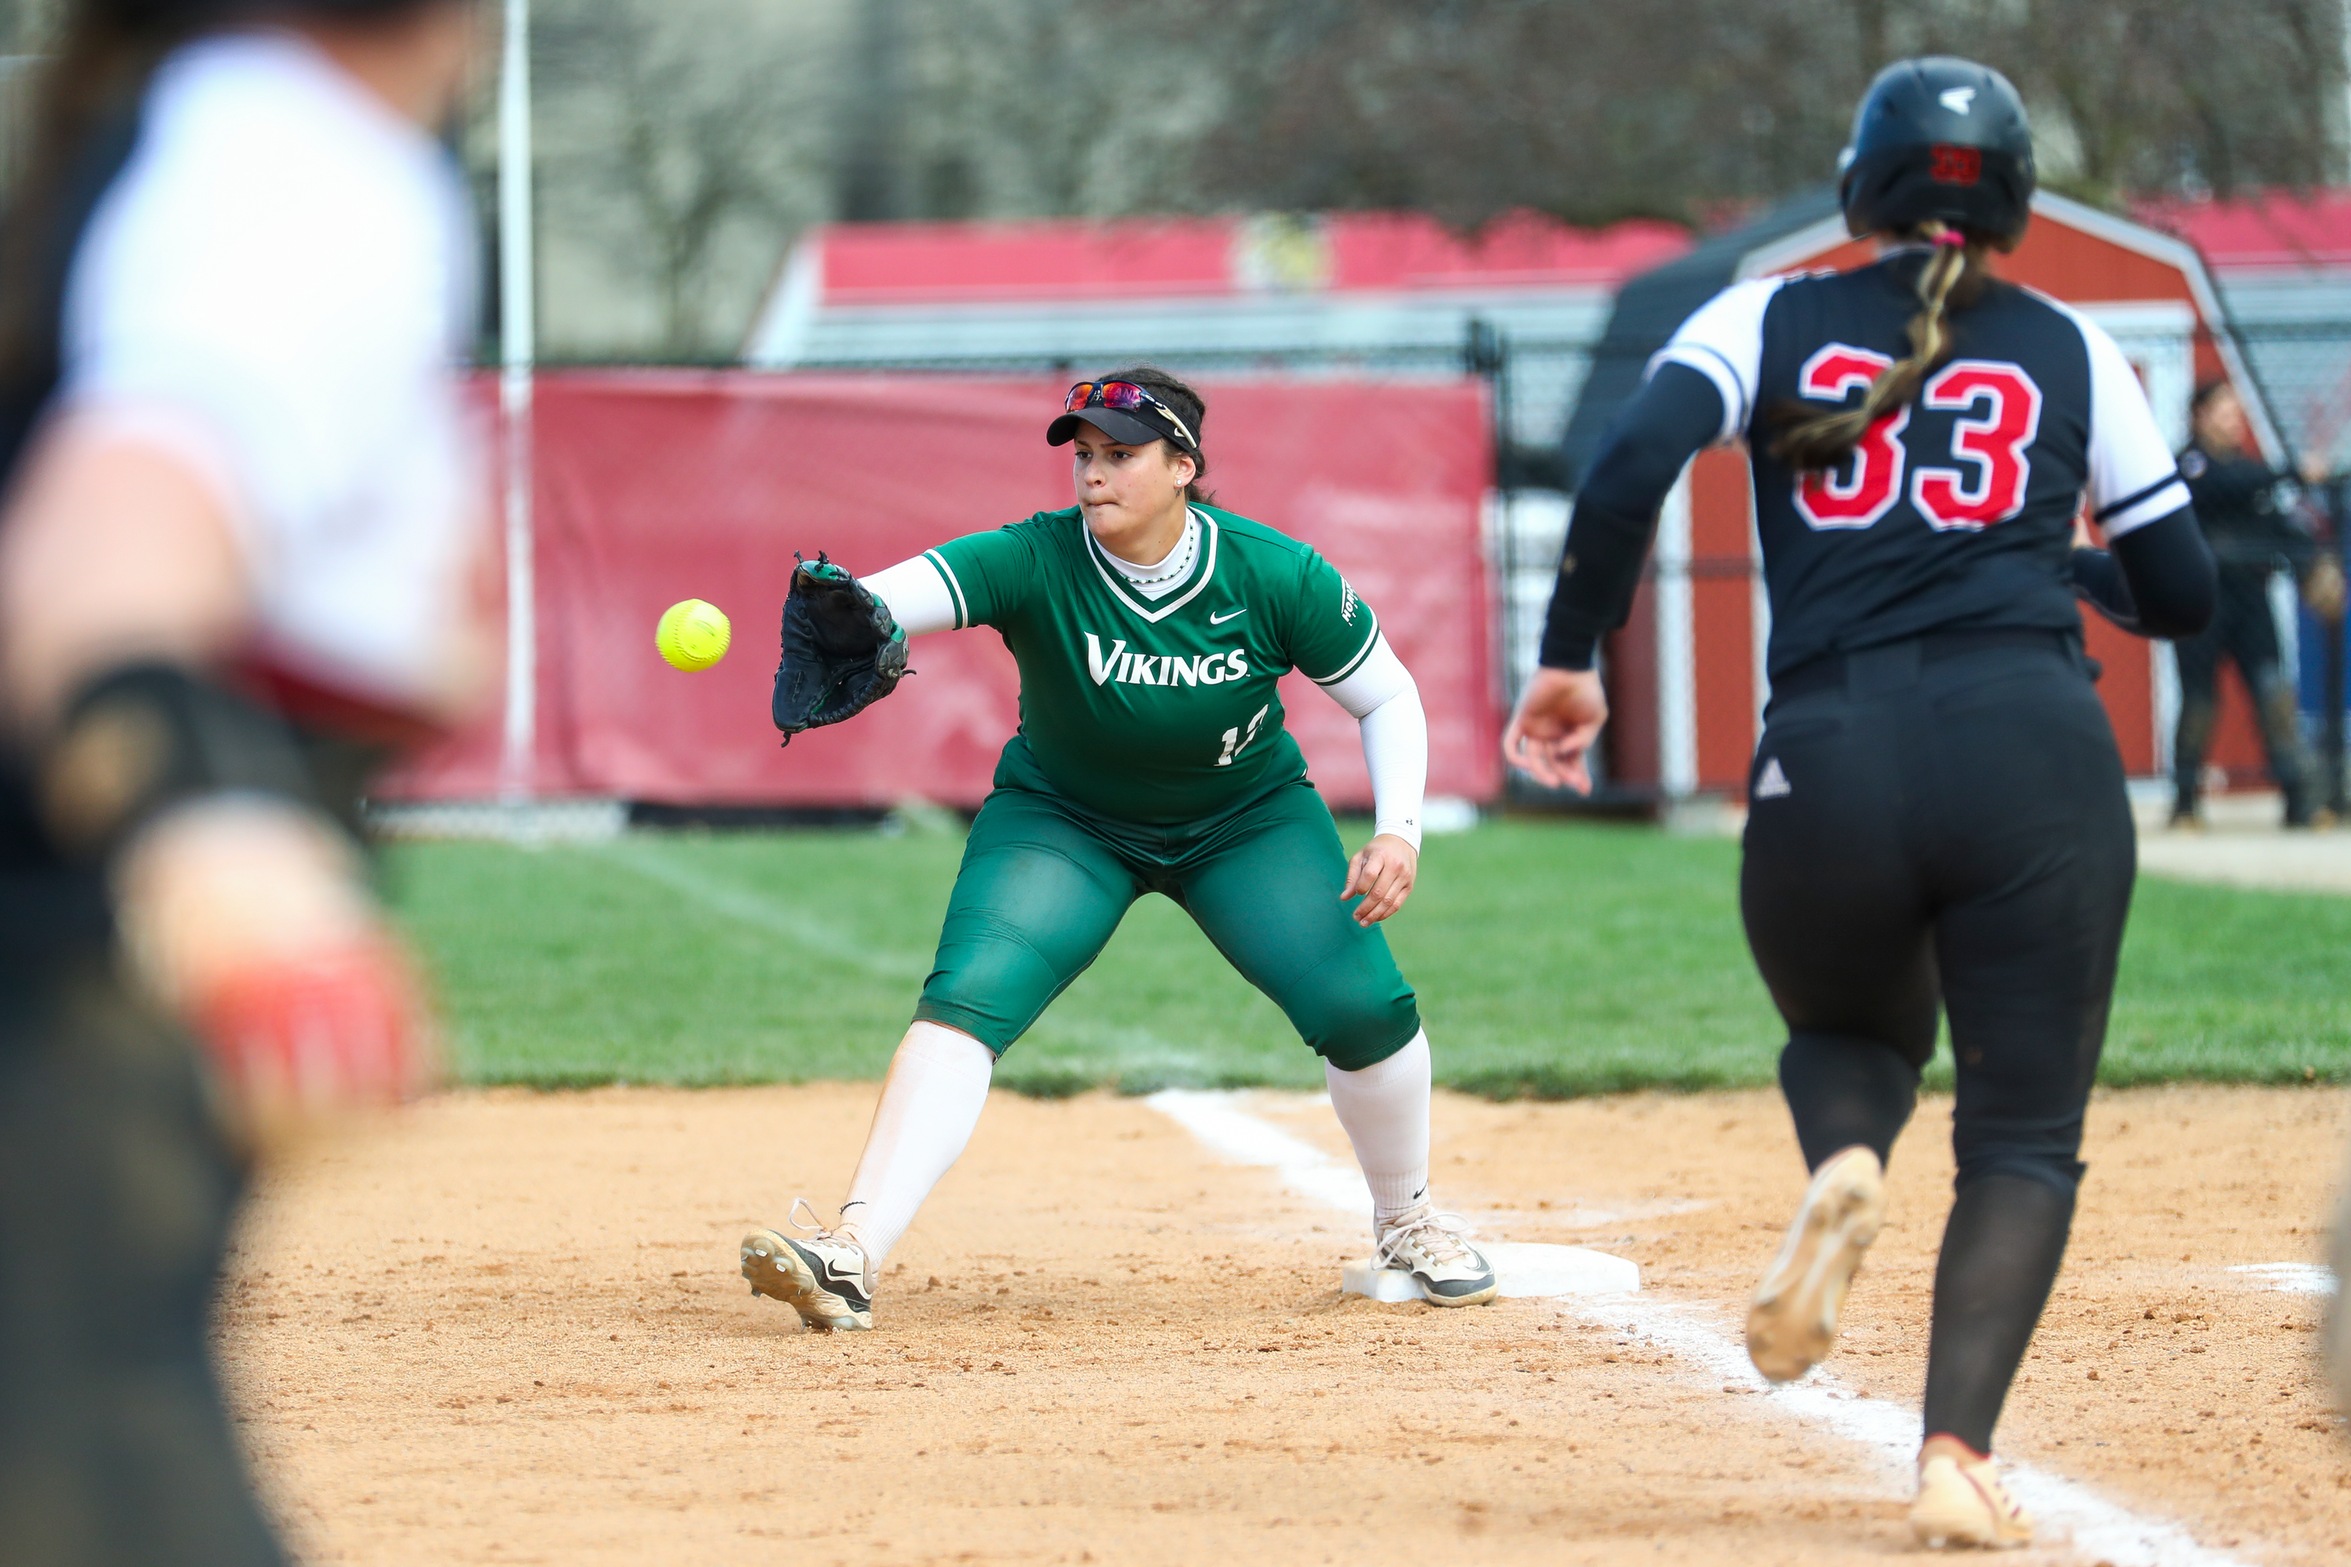 Hurosky Named #HLSB Player of the Week